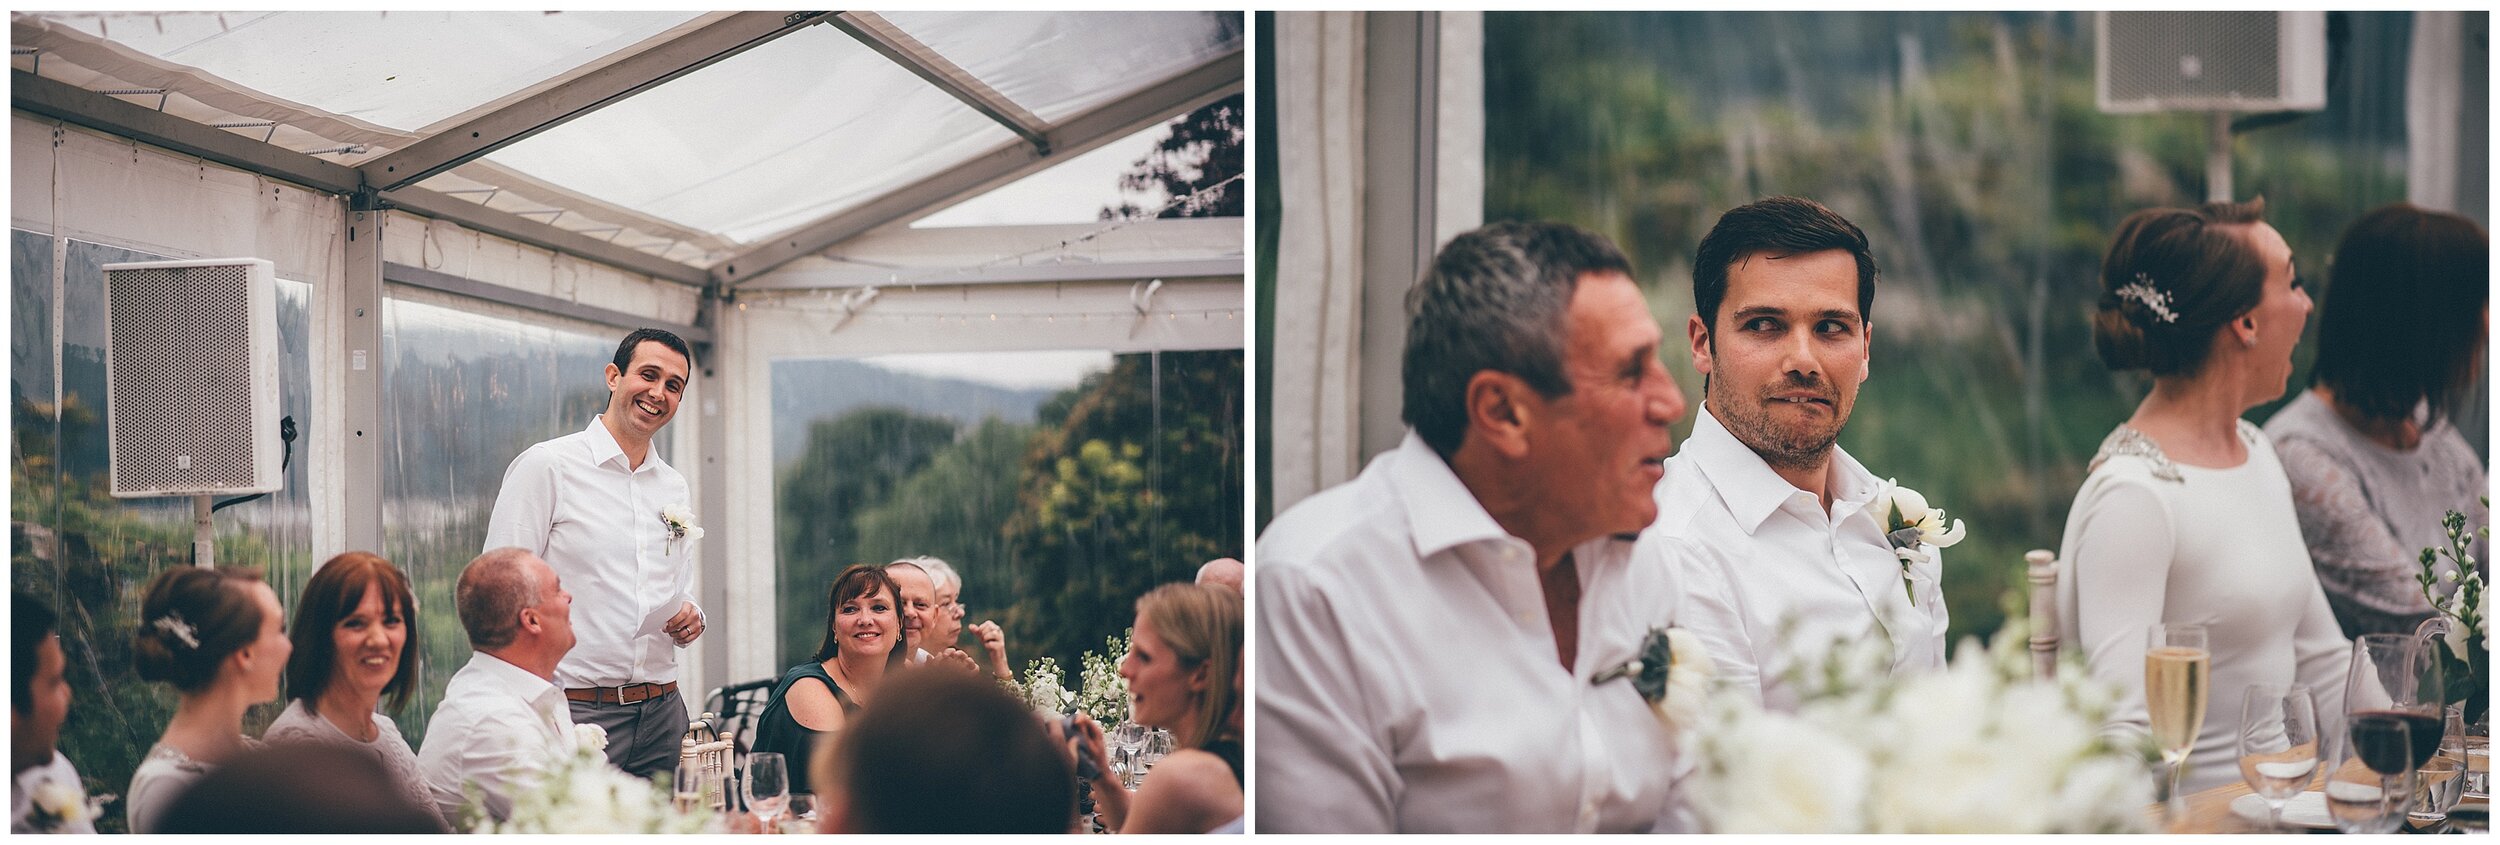 Wedding guests play a game during the speeches at Silverholme Manor, Graythwaite Estate.